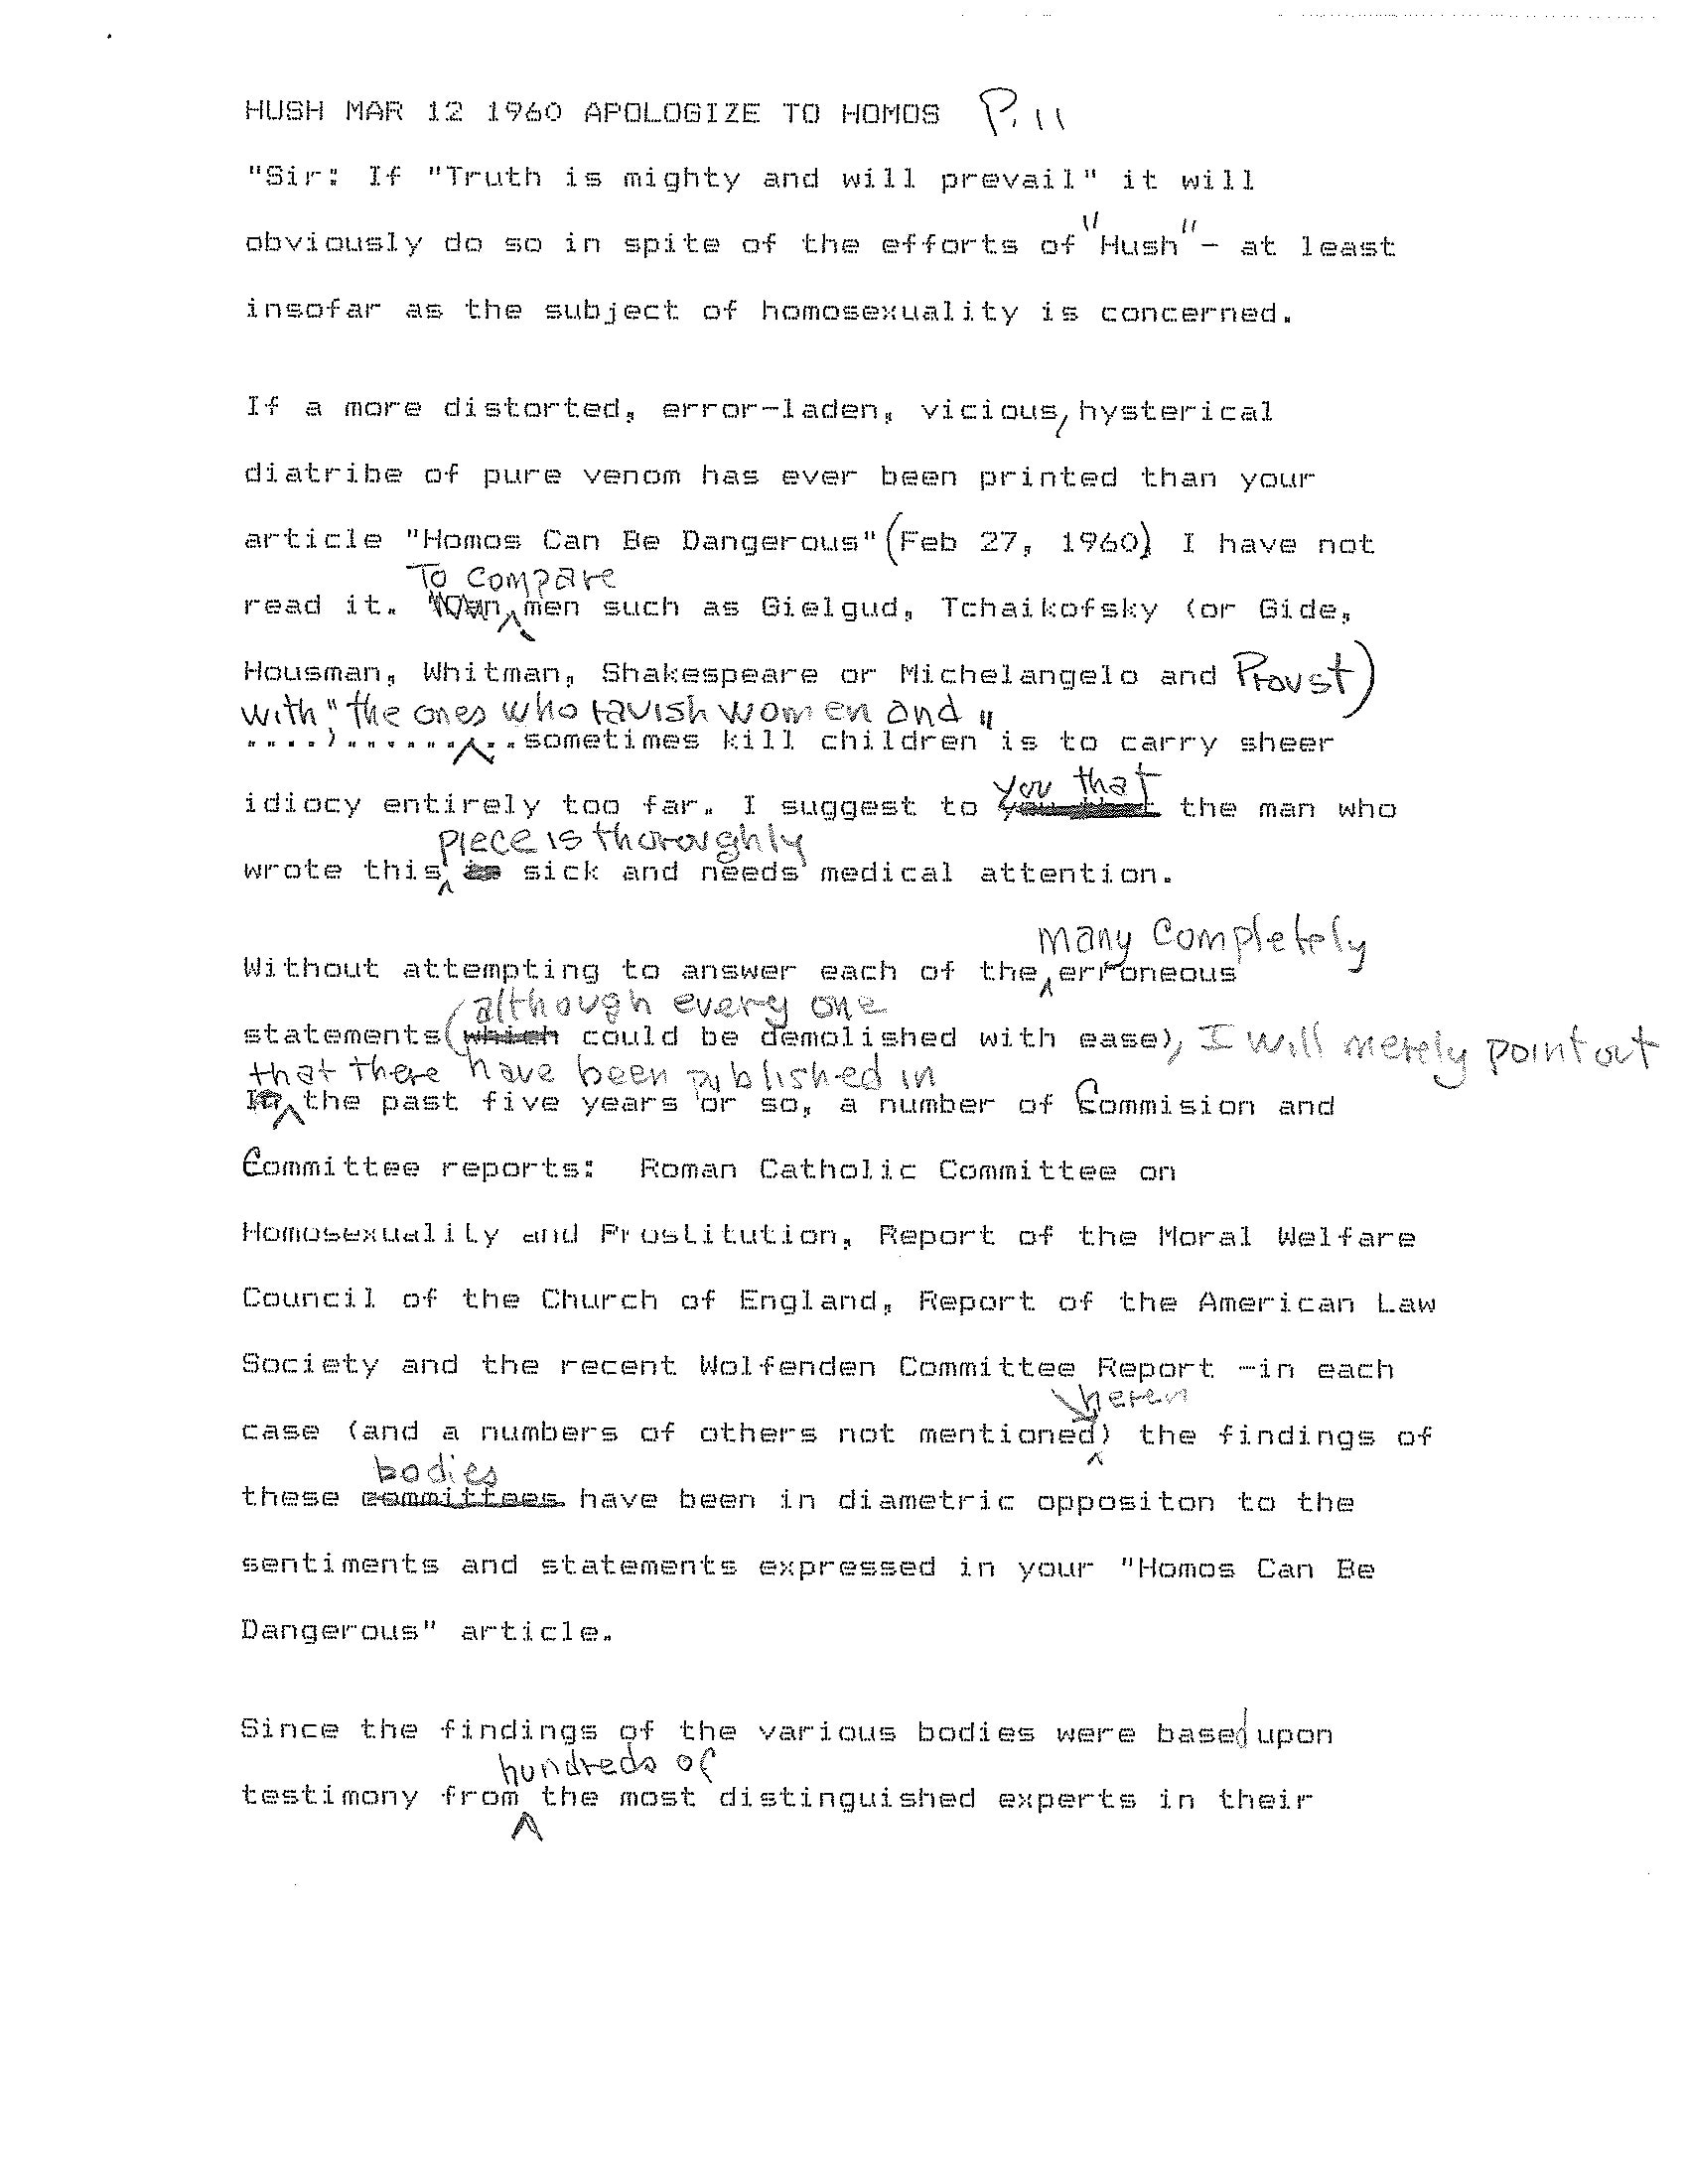 James Egan's typewritten letter to Hush magazine in 1960, with edits written over top in pen.